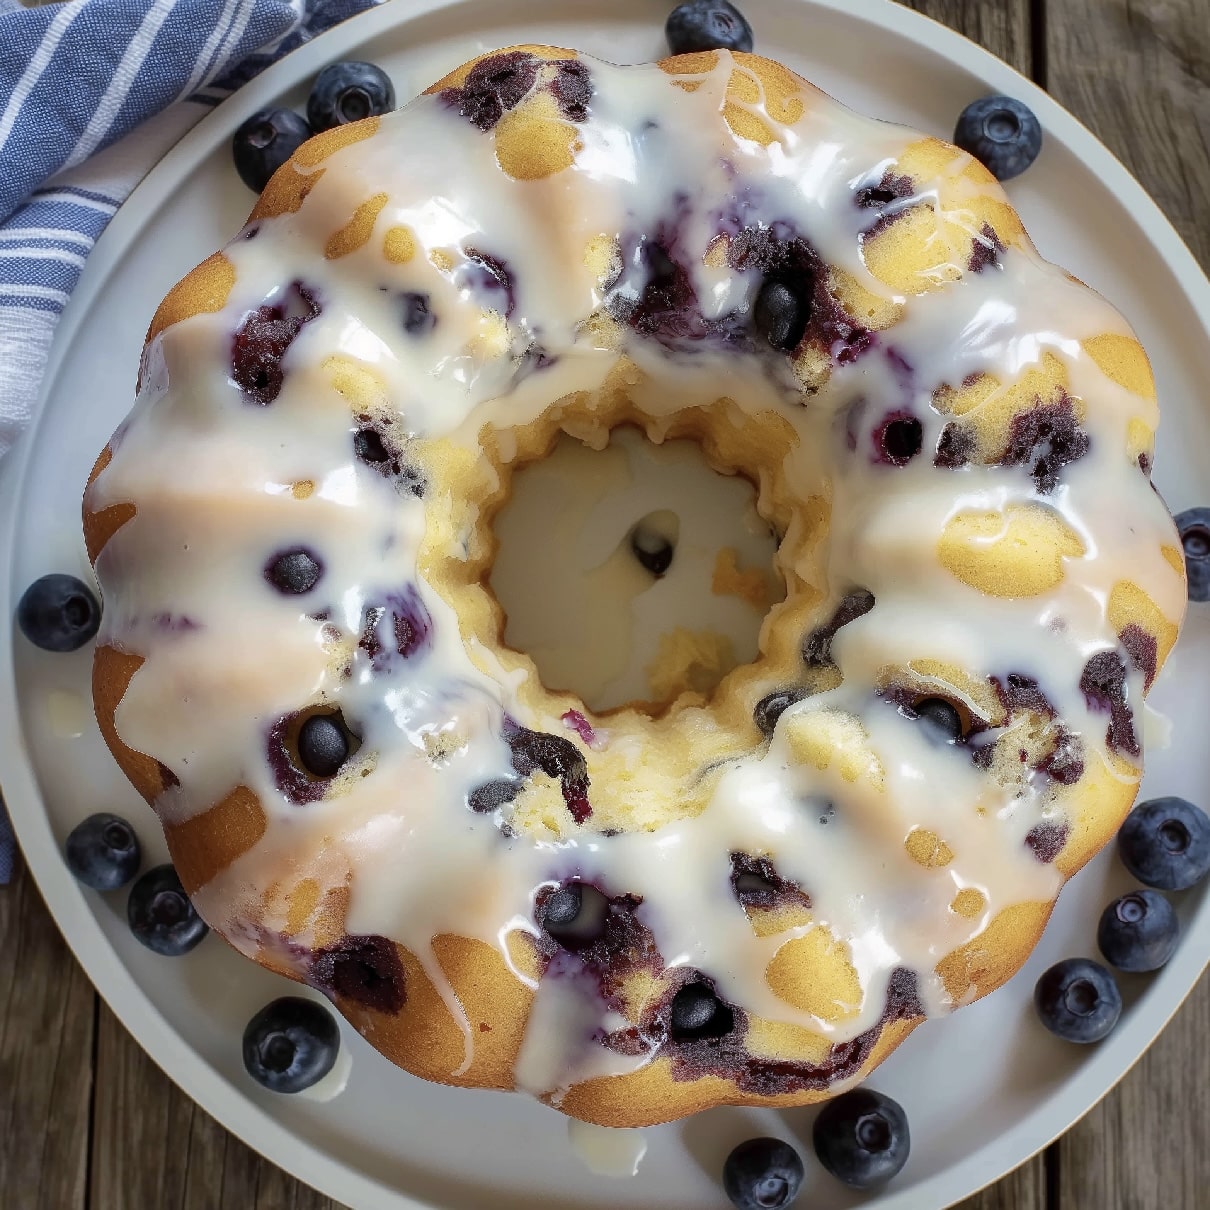 Dive into the delightful world of baking with our Lemon Blueberry Pound Cake recipe, where tangy lemon meets sweet blueberries in a dance of flavors. Perfect for any occasion!